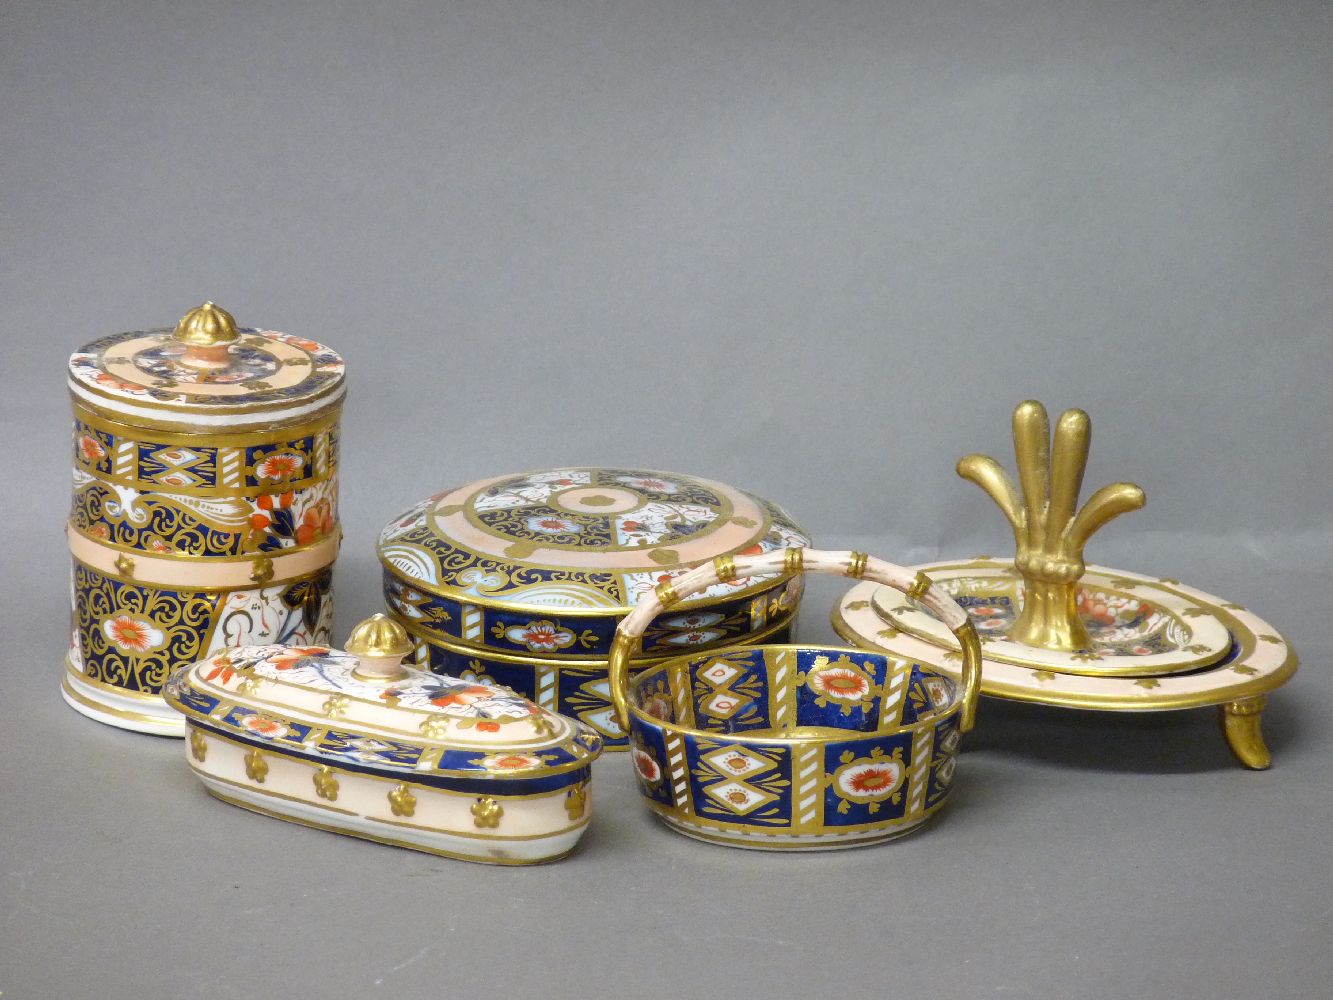 A davenport dressing table box and cover, a ring tree, a pin tray, an oval box and cover, a